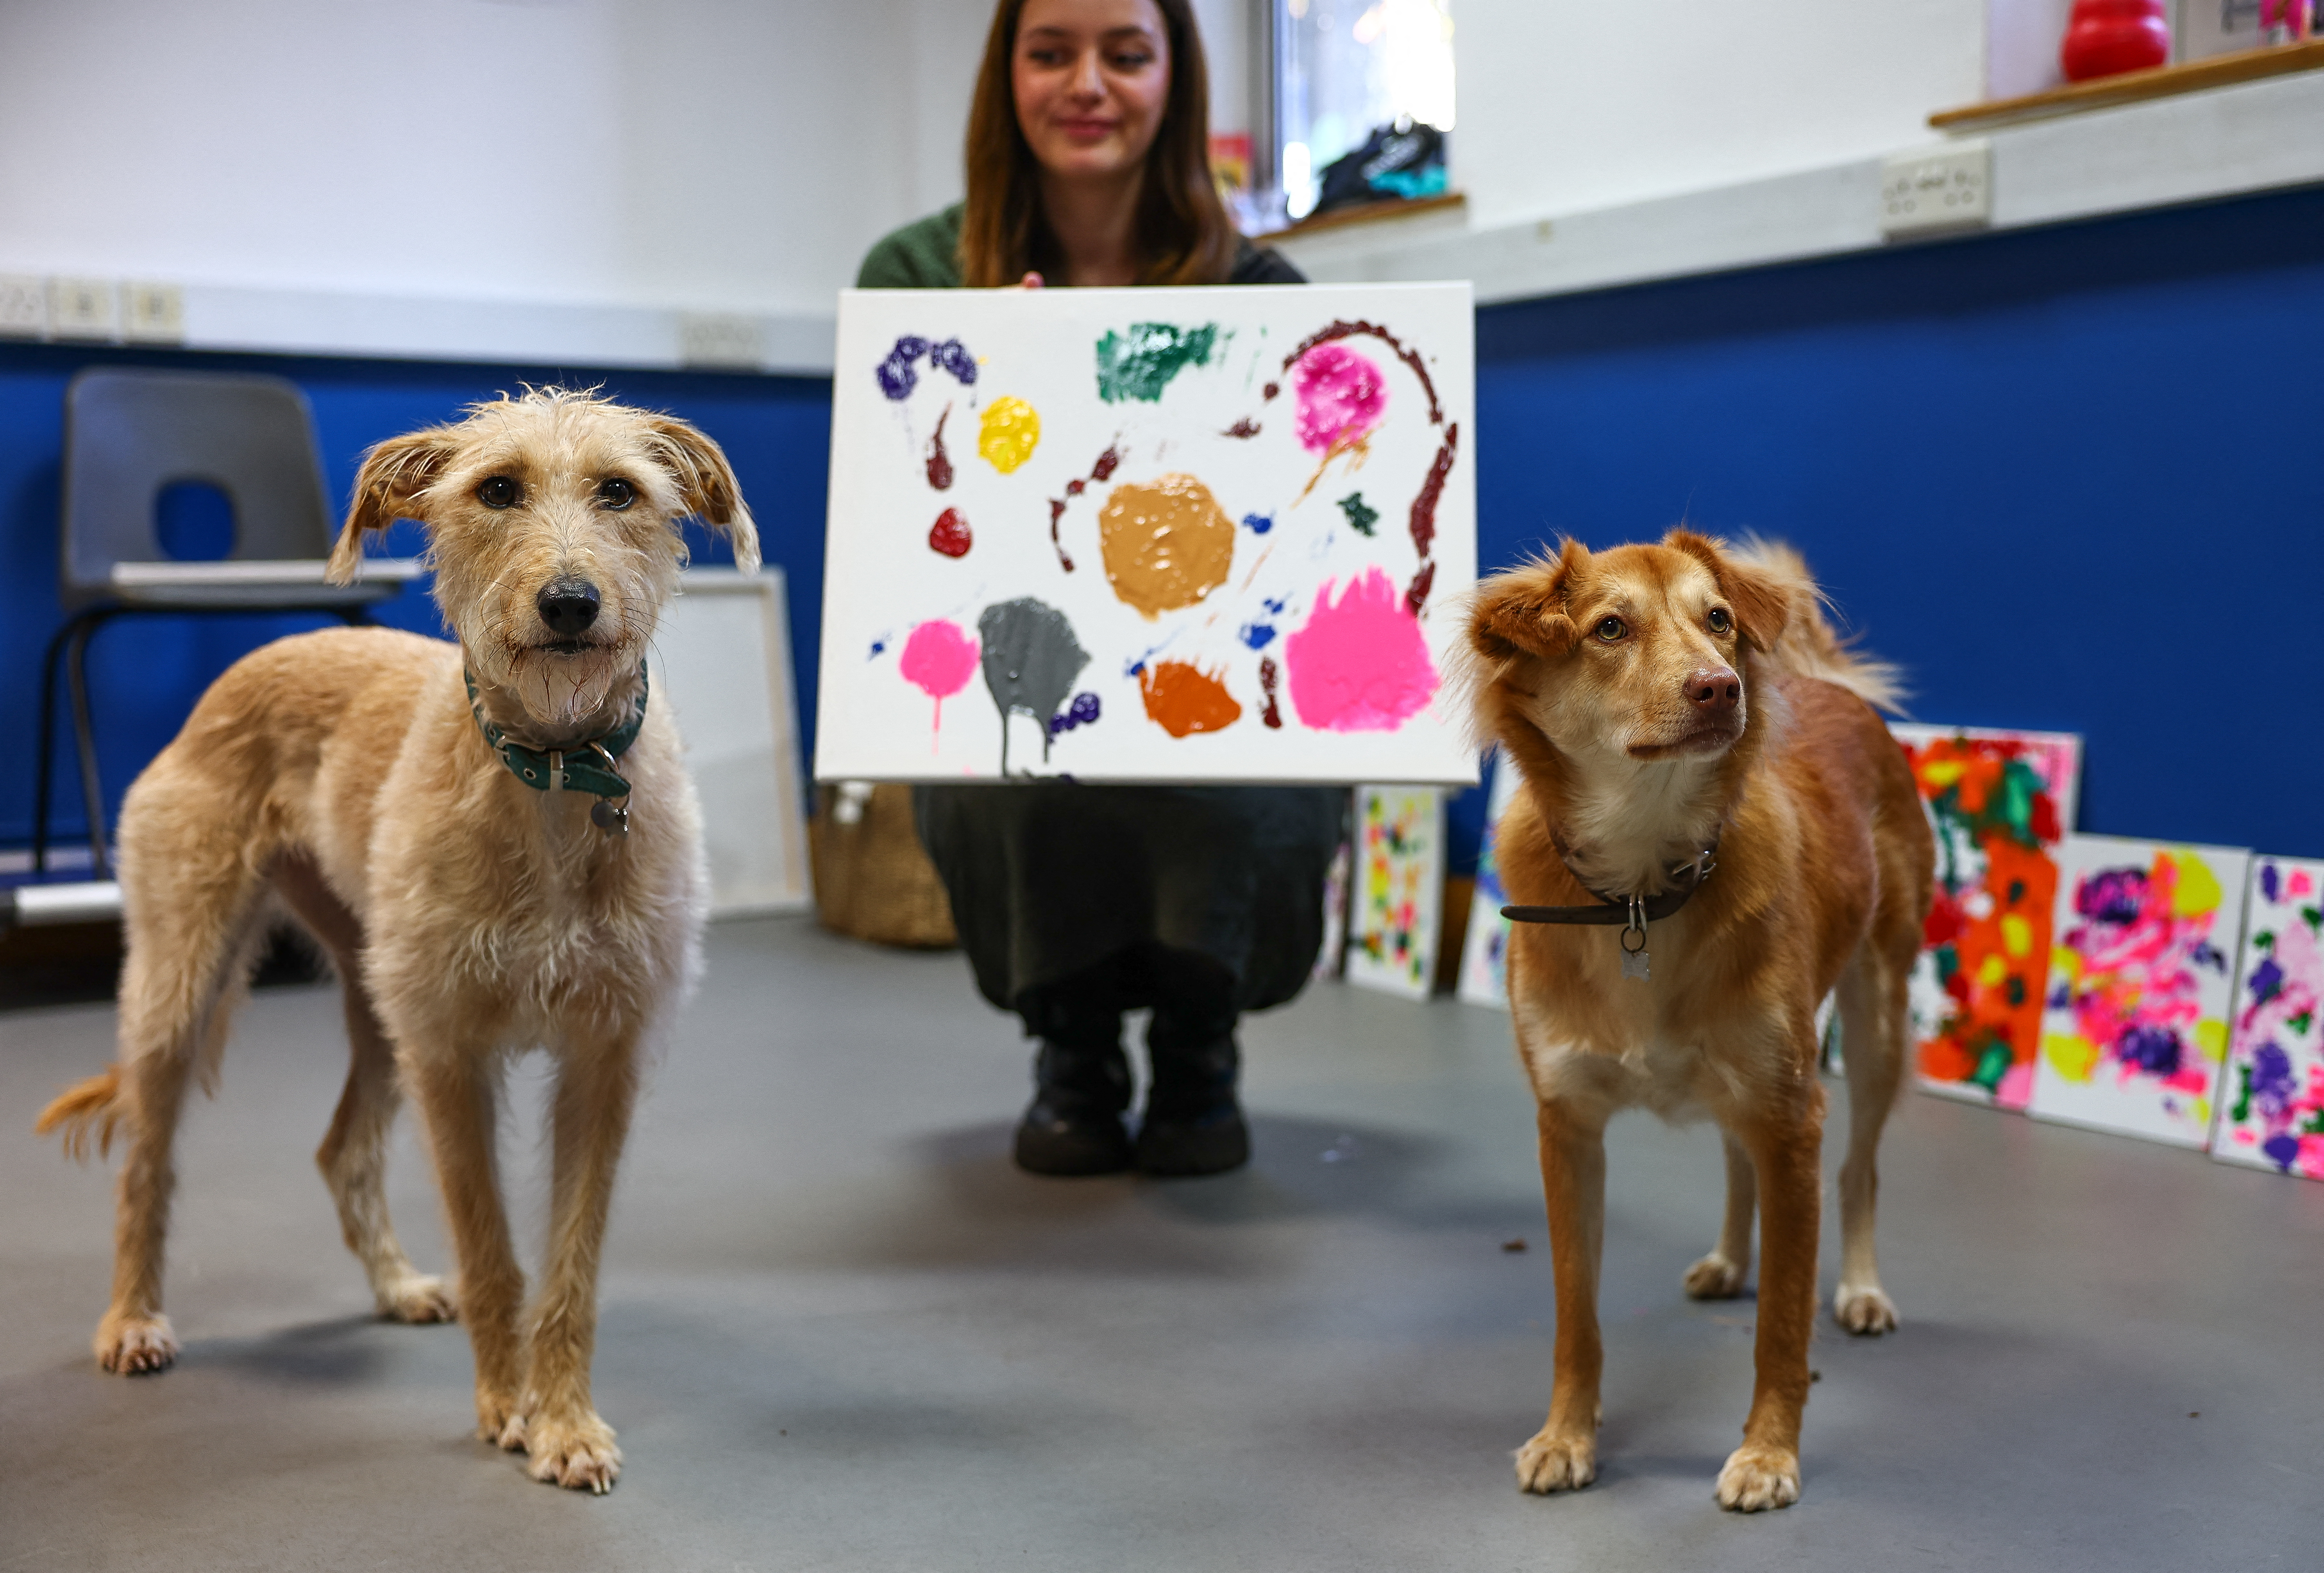 The number of stray dogs in the UK has surged - but for Rosie and Alba, art therapy is helping them to adapt to life at a rescue center. /Henry Nicholls/AFP